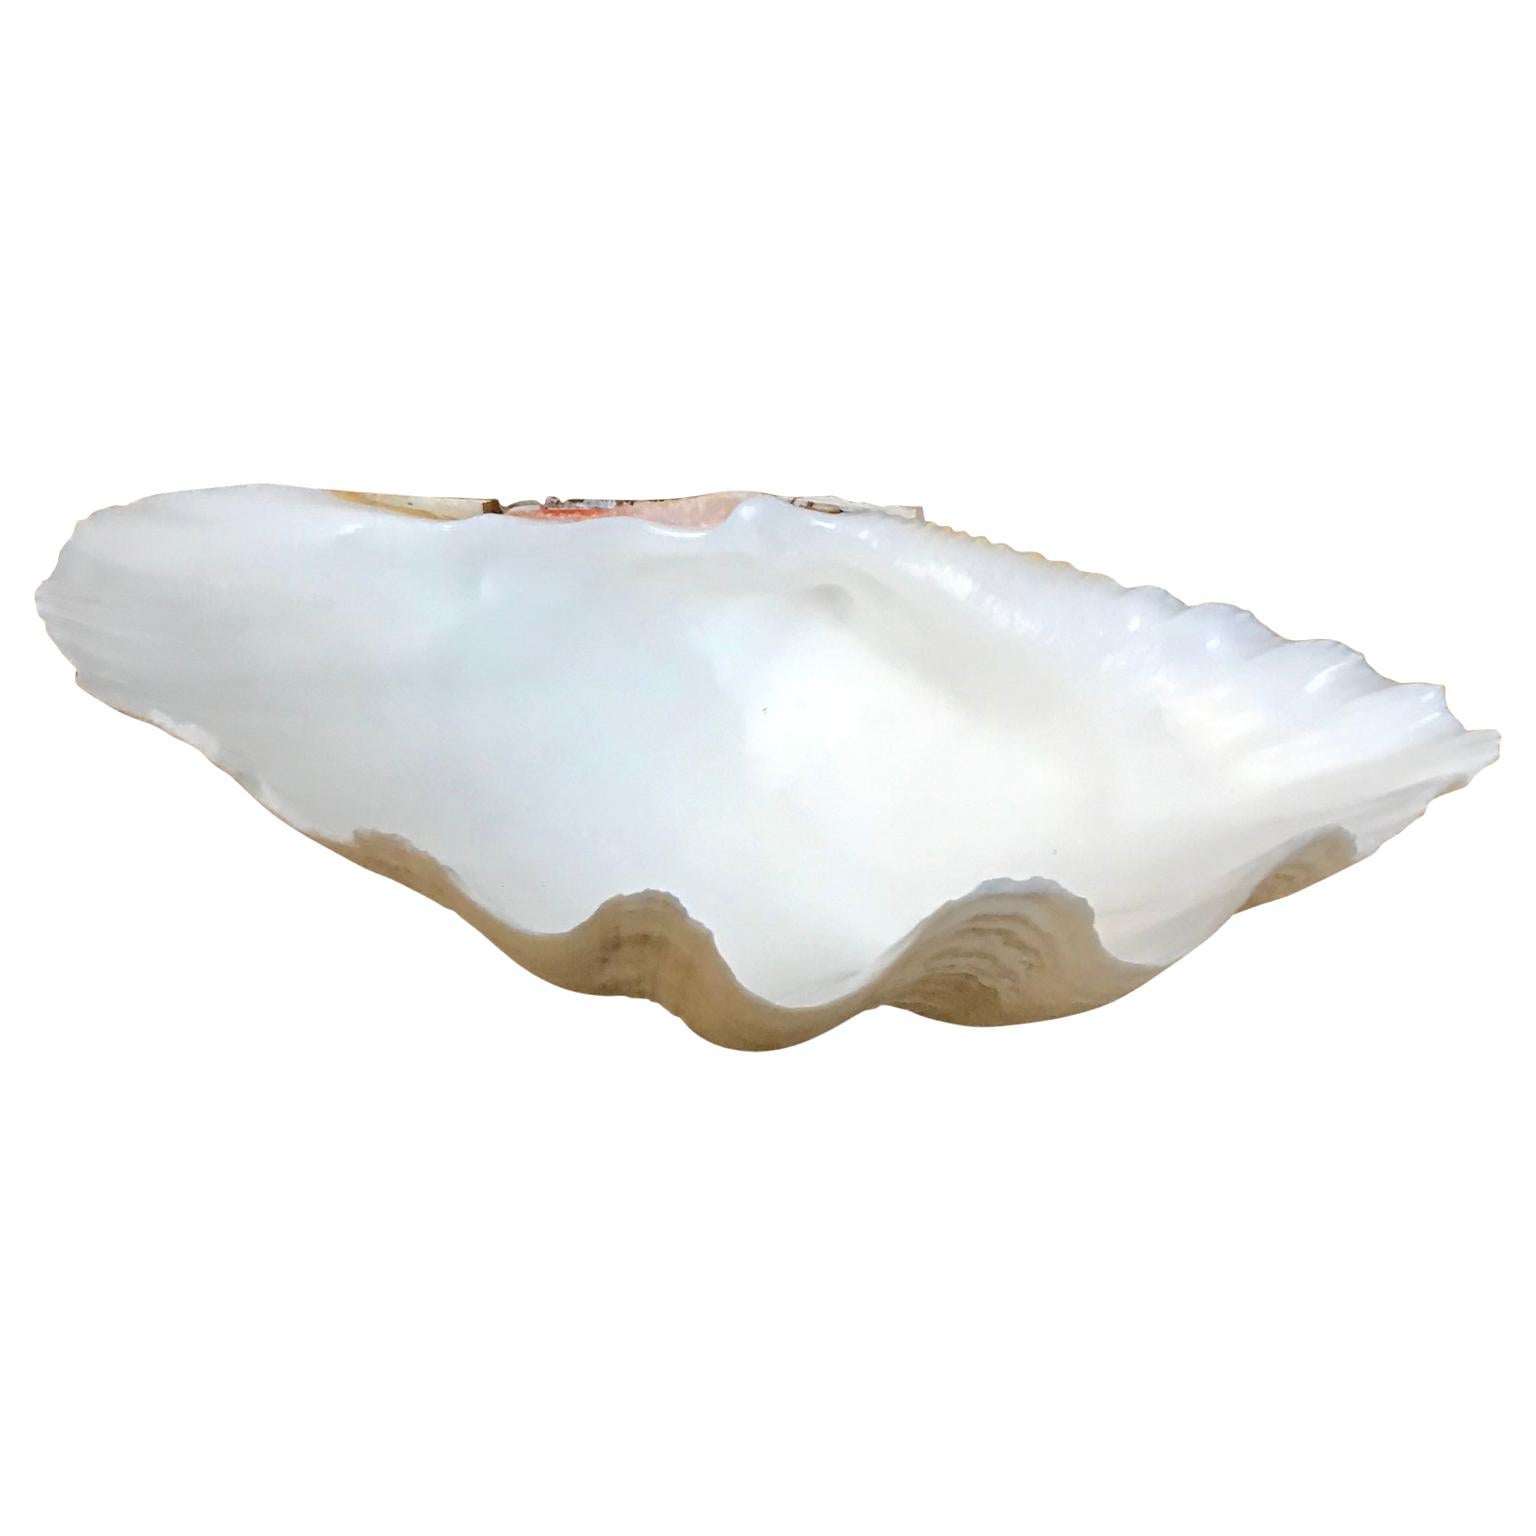 Shell Small South Pacific Tridacna Gigas Clam Trinket For Sale